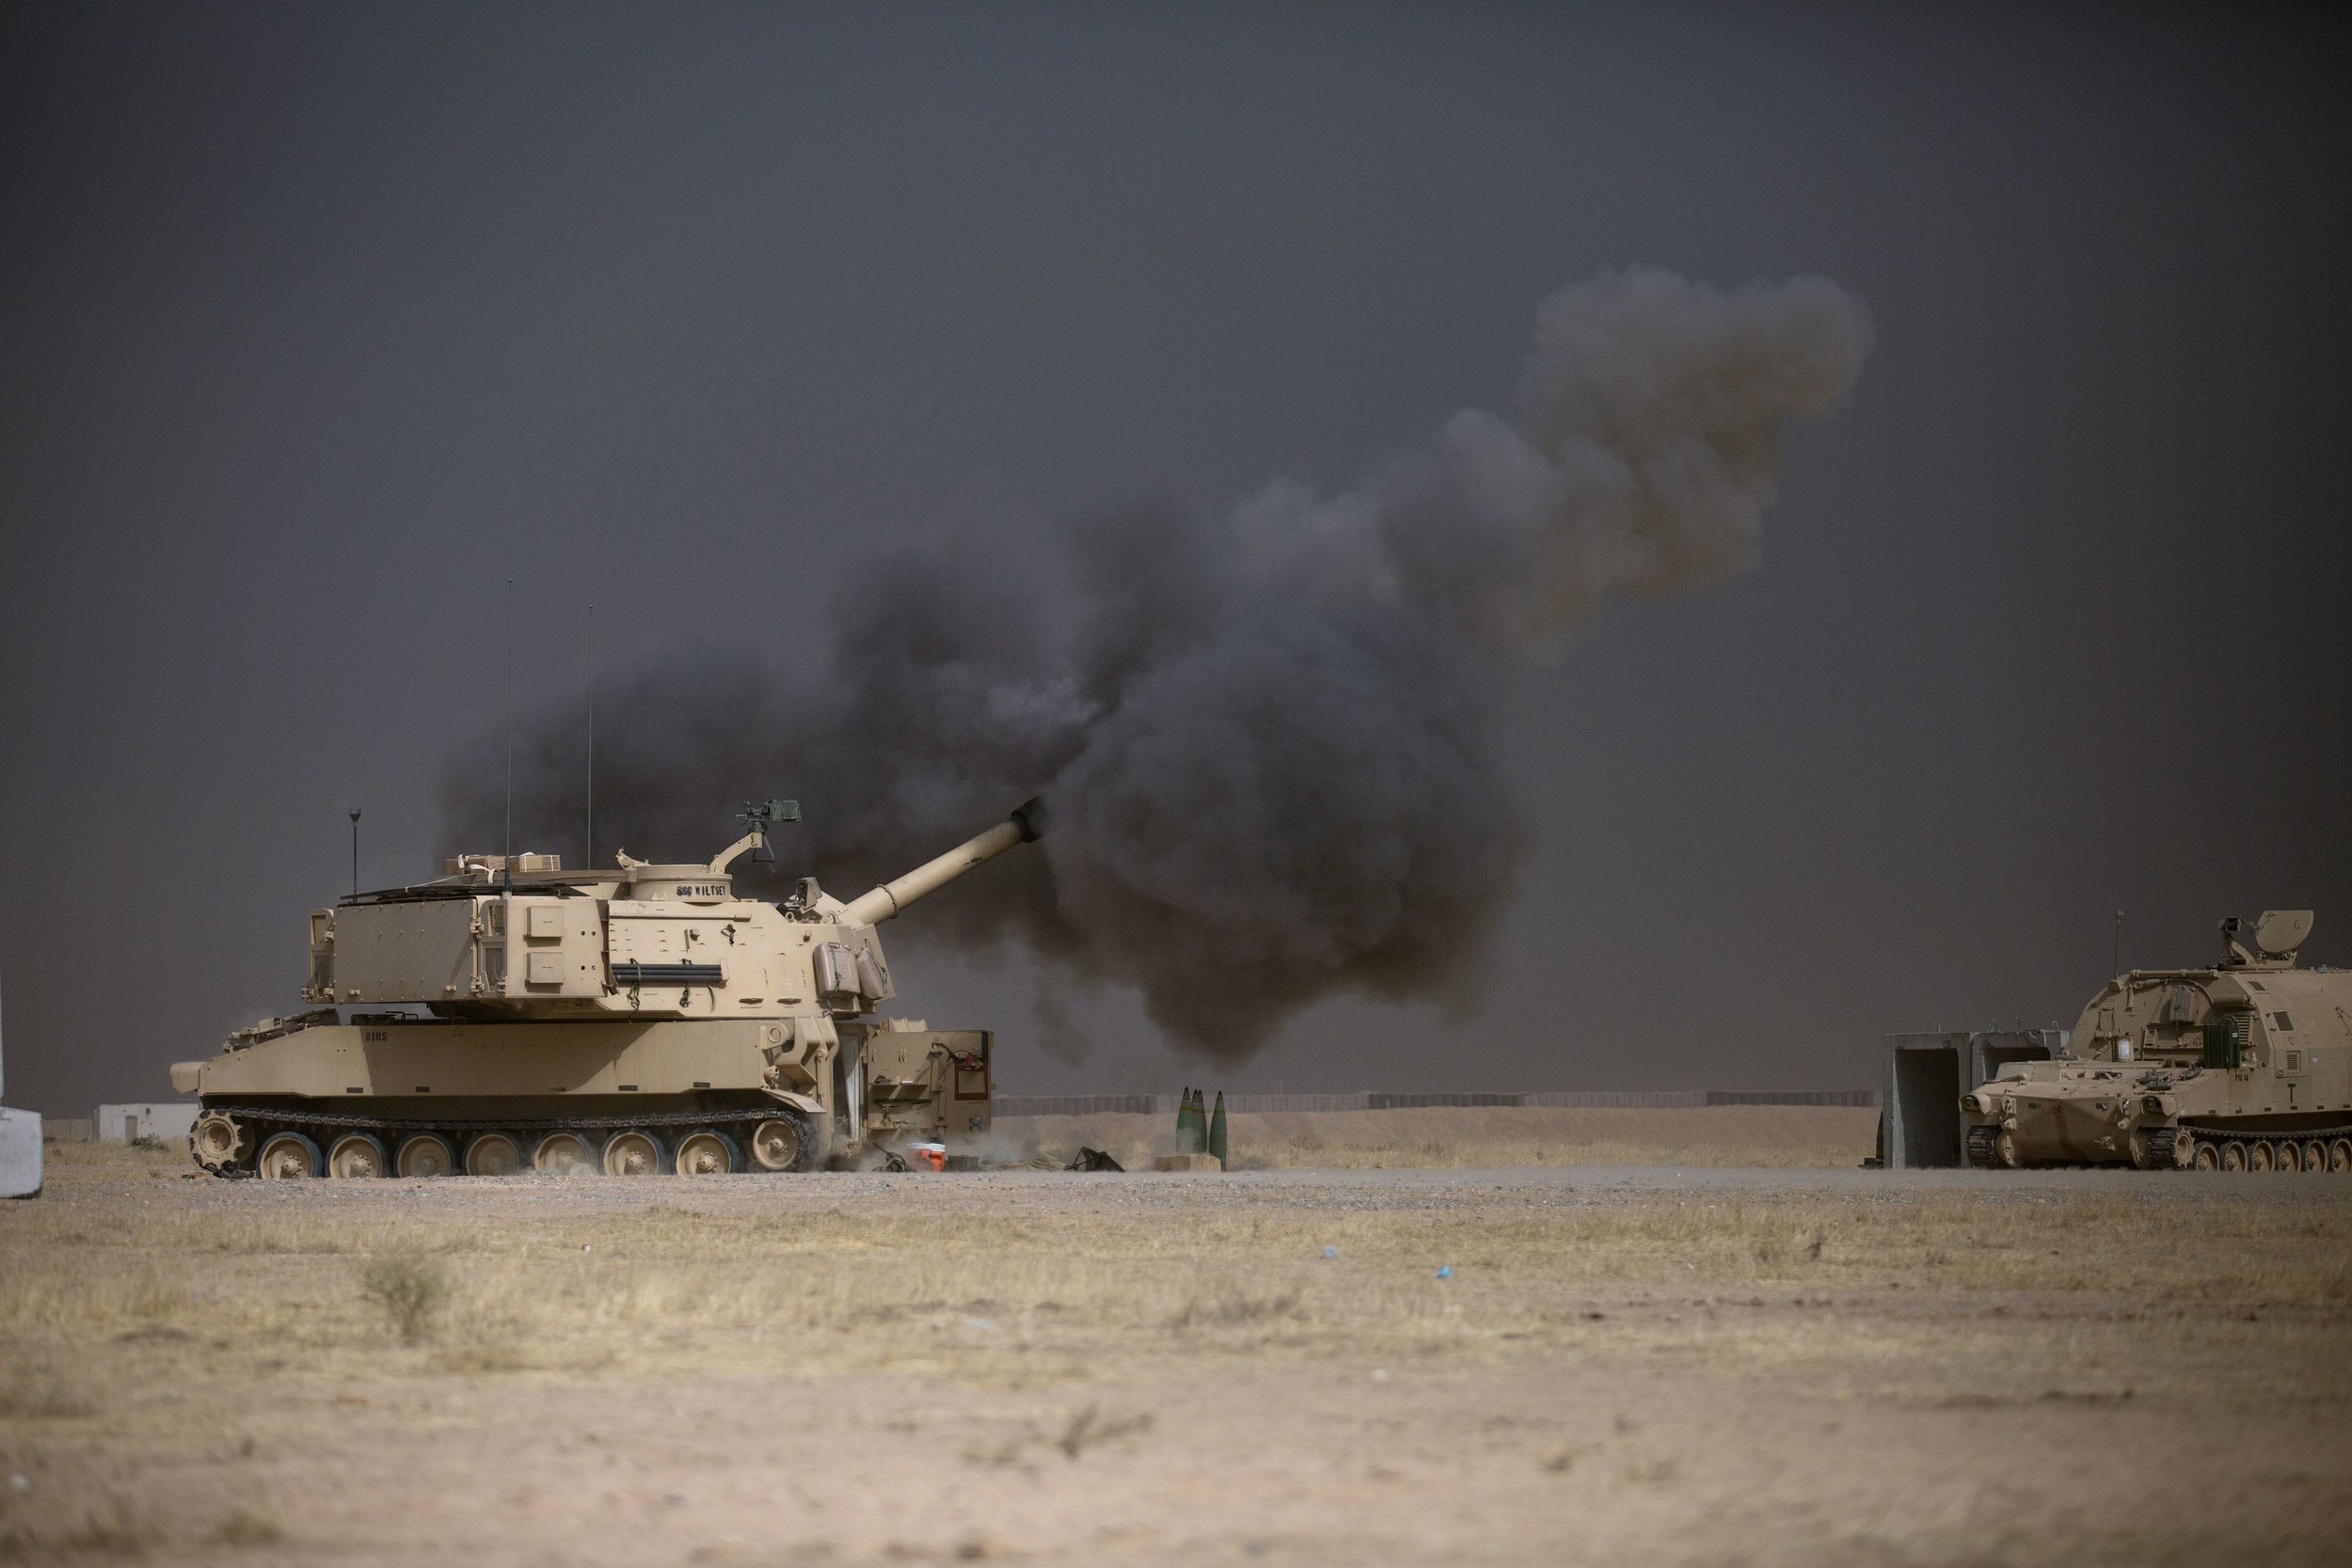 A U.S. Army M109A6 Paladin conducts a fire mission at Qayyarah West, Iraq, in support of the Iraqi security forces’ push toward Mosul, Oct. 17, 2016. (U.S. Army photo by Spc. Christopher Brecht)